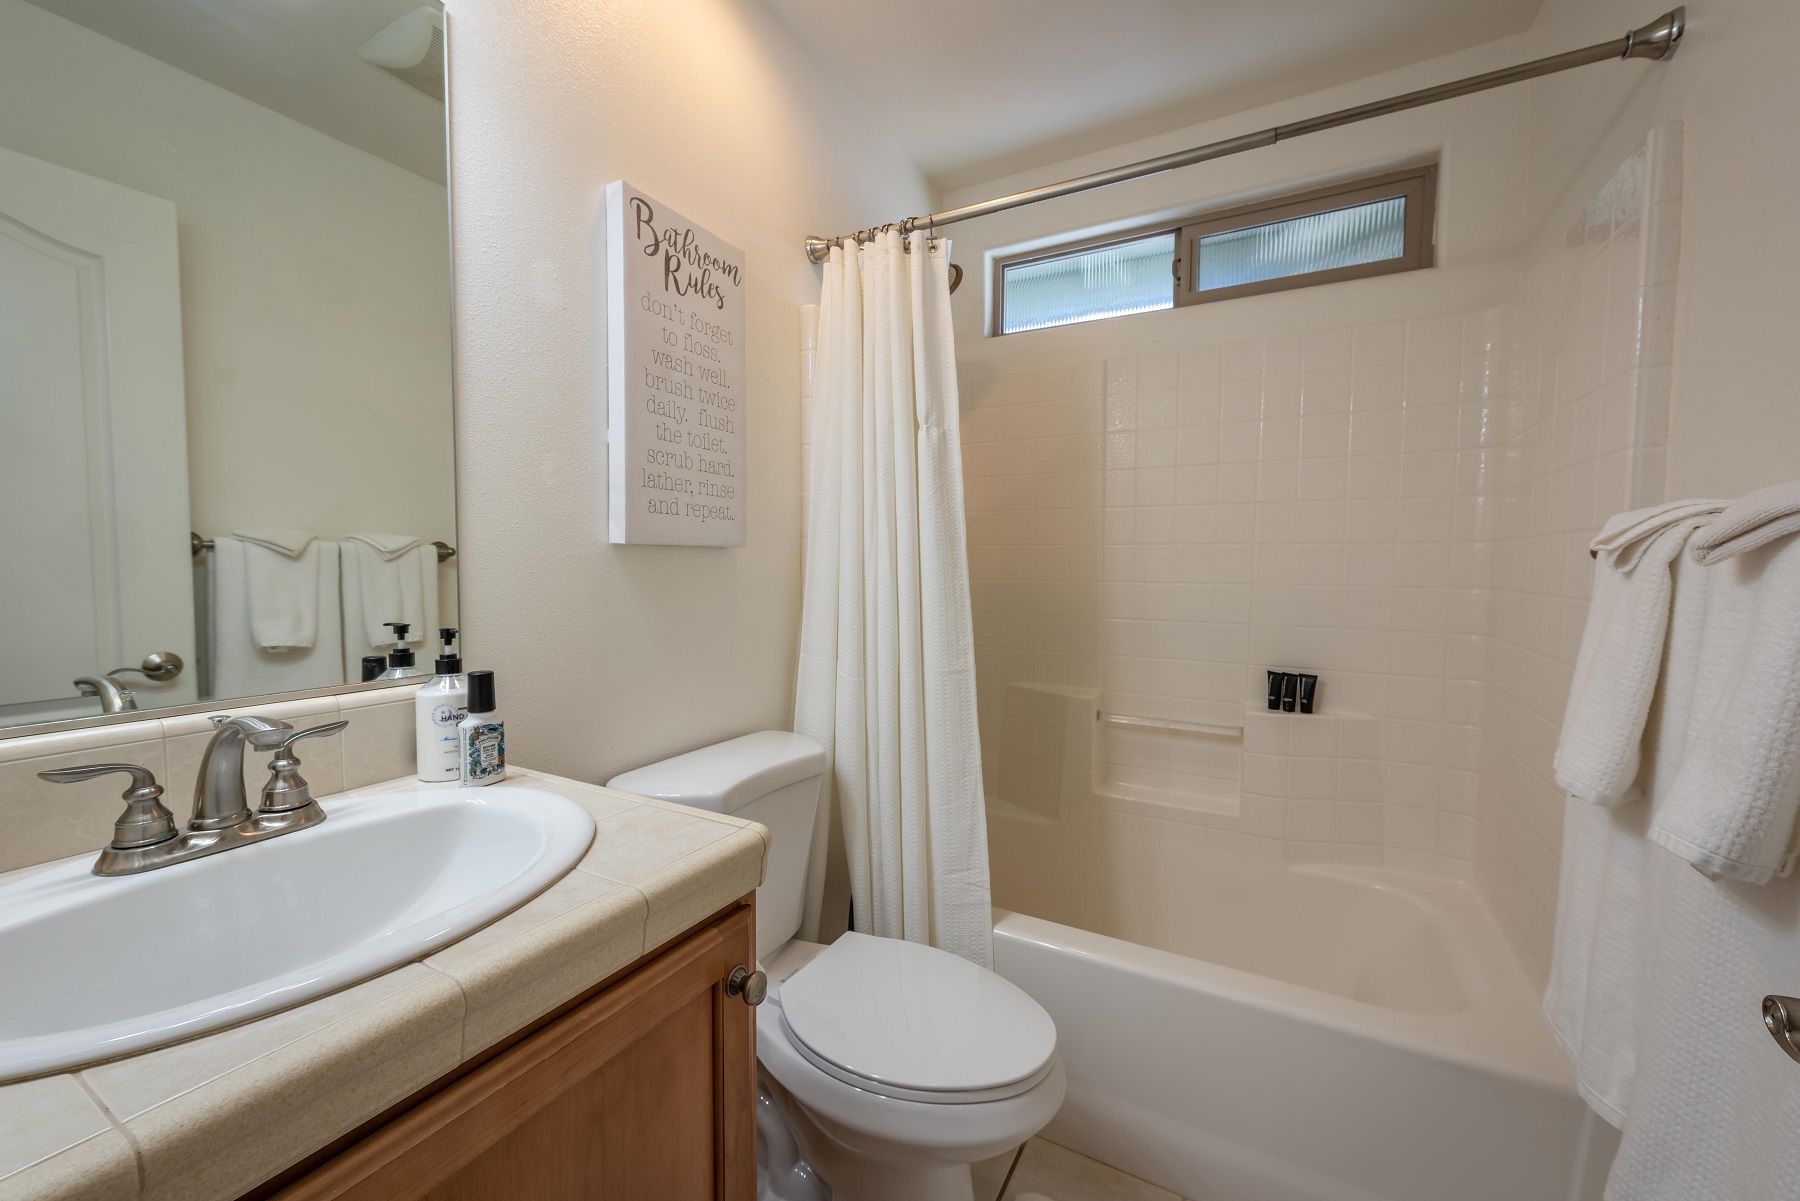 Full bath with tub/shower combo, shared by Bedroom 2 & 3